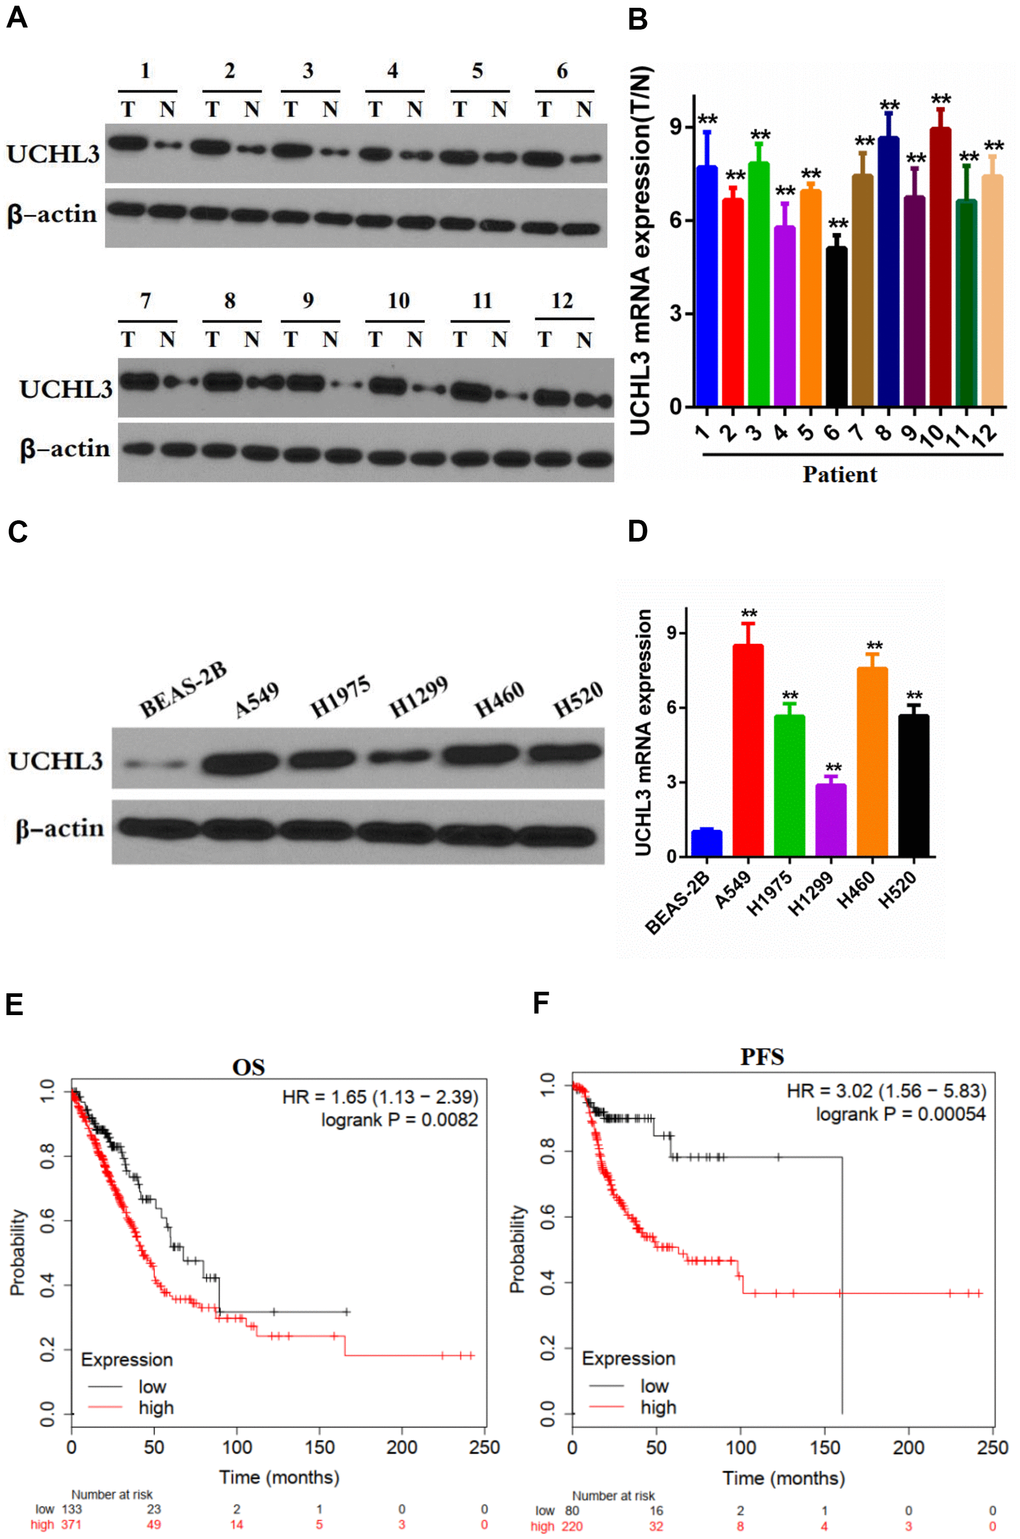 Expression of UCHL3 is up-regulated in non-small cell lung cancer tissues and cell lines. (A, B) Western blot analysis (A) and real-time PCR (B) analysis of UCHL3 expression in 12 paired tumor (T) tissues and adjacent non-tumor (N) tissues. (C, D) Western blot analysis (C) and real-time PCR (D) analysis of UCHL3 expression in normal lung epithelial cell lines BEAS-2B and non-small cell lung cancer (NSCLC) cell lines A649, H1975, H1299, H460, H520. (E, F) Kaplan-Meier analysis of OS (E), PFS (F) in NSCLC patients. Data was obtained from Kaplan-Meier Plotter website. OS, overall survival. PFS, progression-free survival. β-actin was used as a loading control. **P 